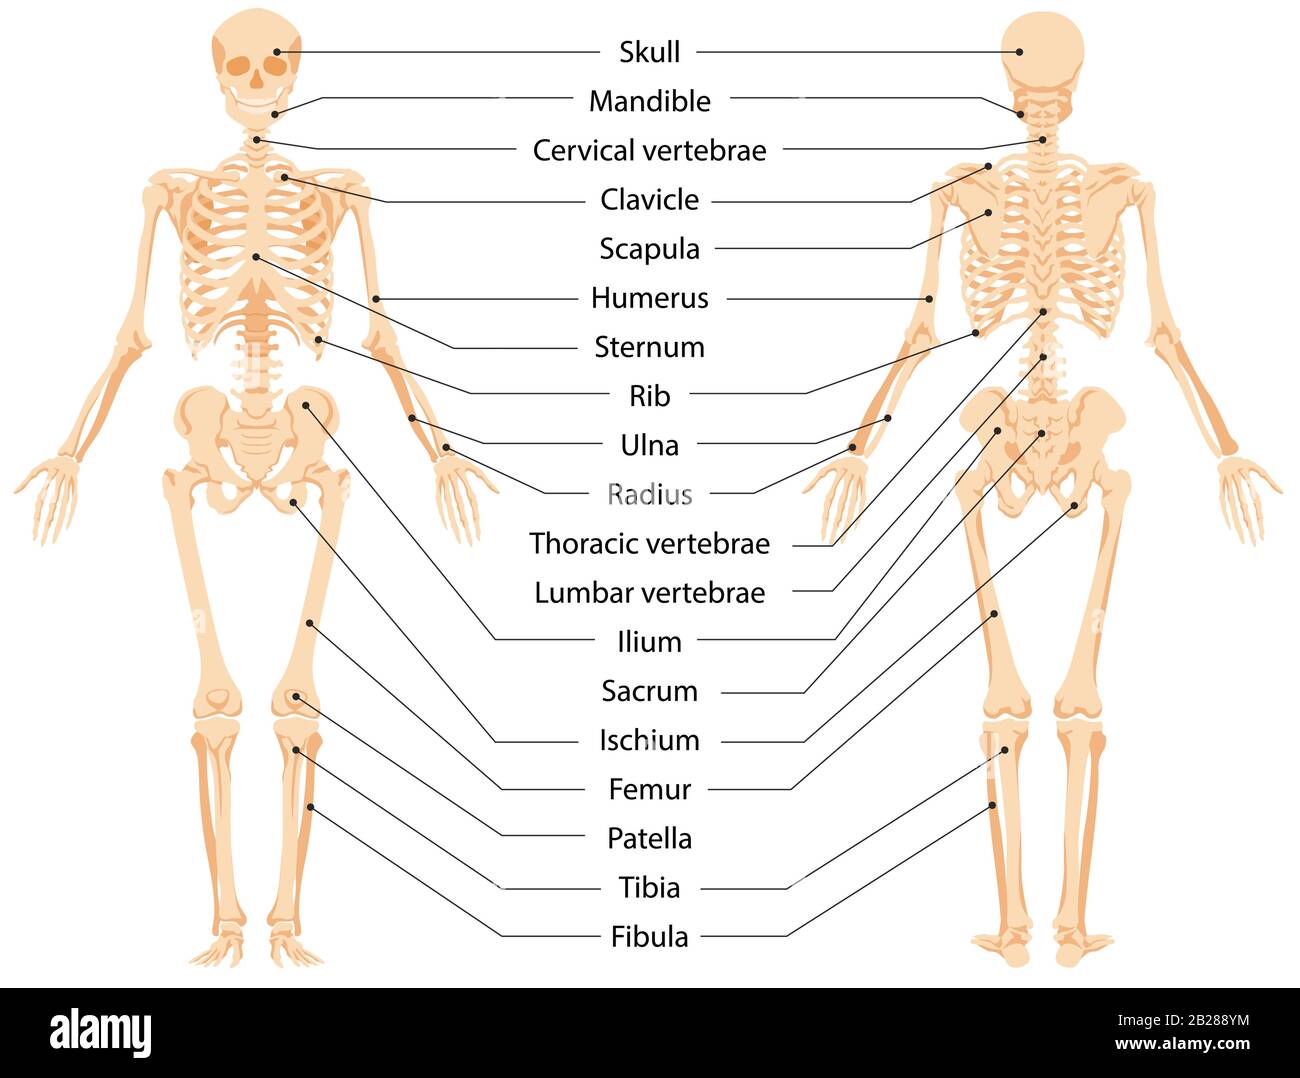 Human anatomical skeleton infographic front view and back view vector graphic illustration Stock Vector